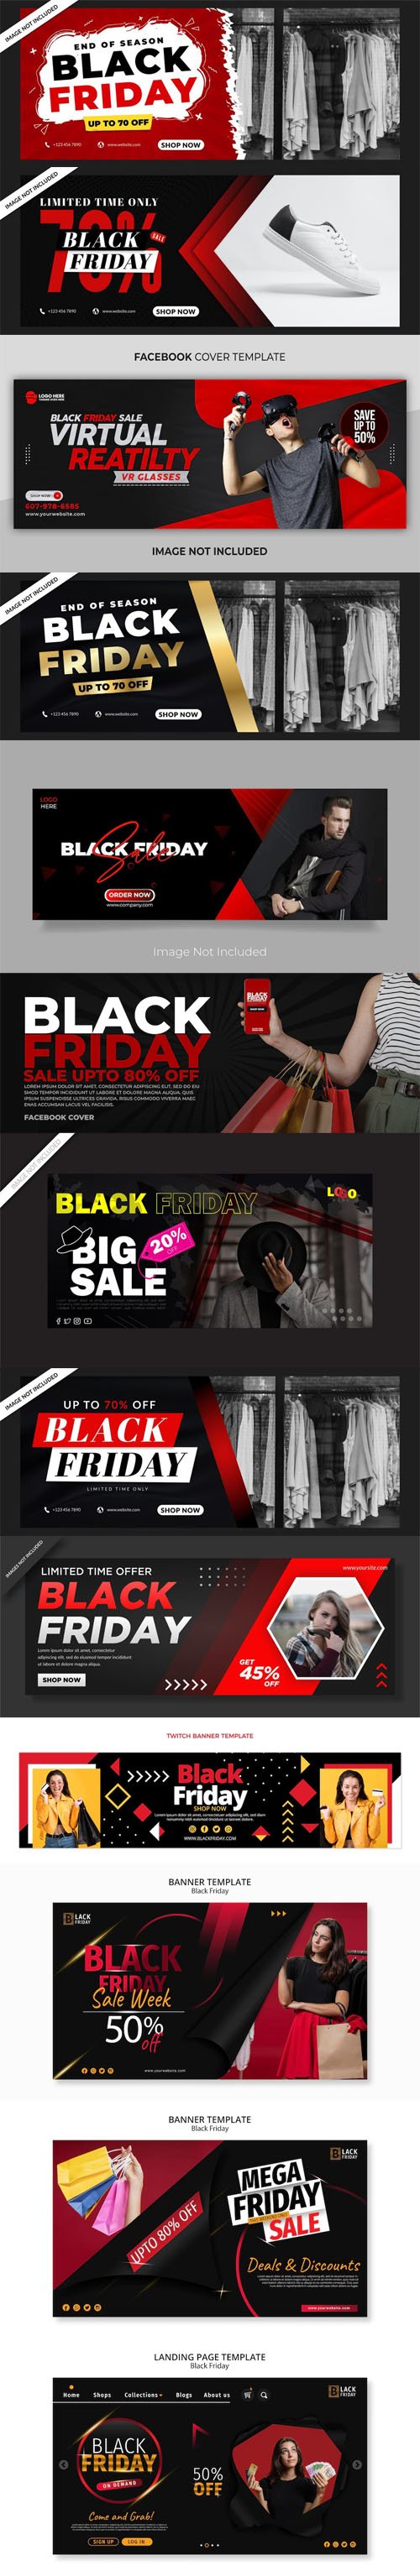 Black Friday - 10+ Web Banners Vector Templates Collection [Vol.3]